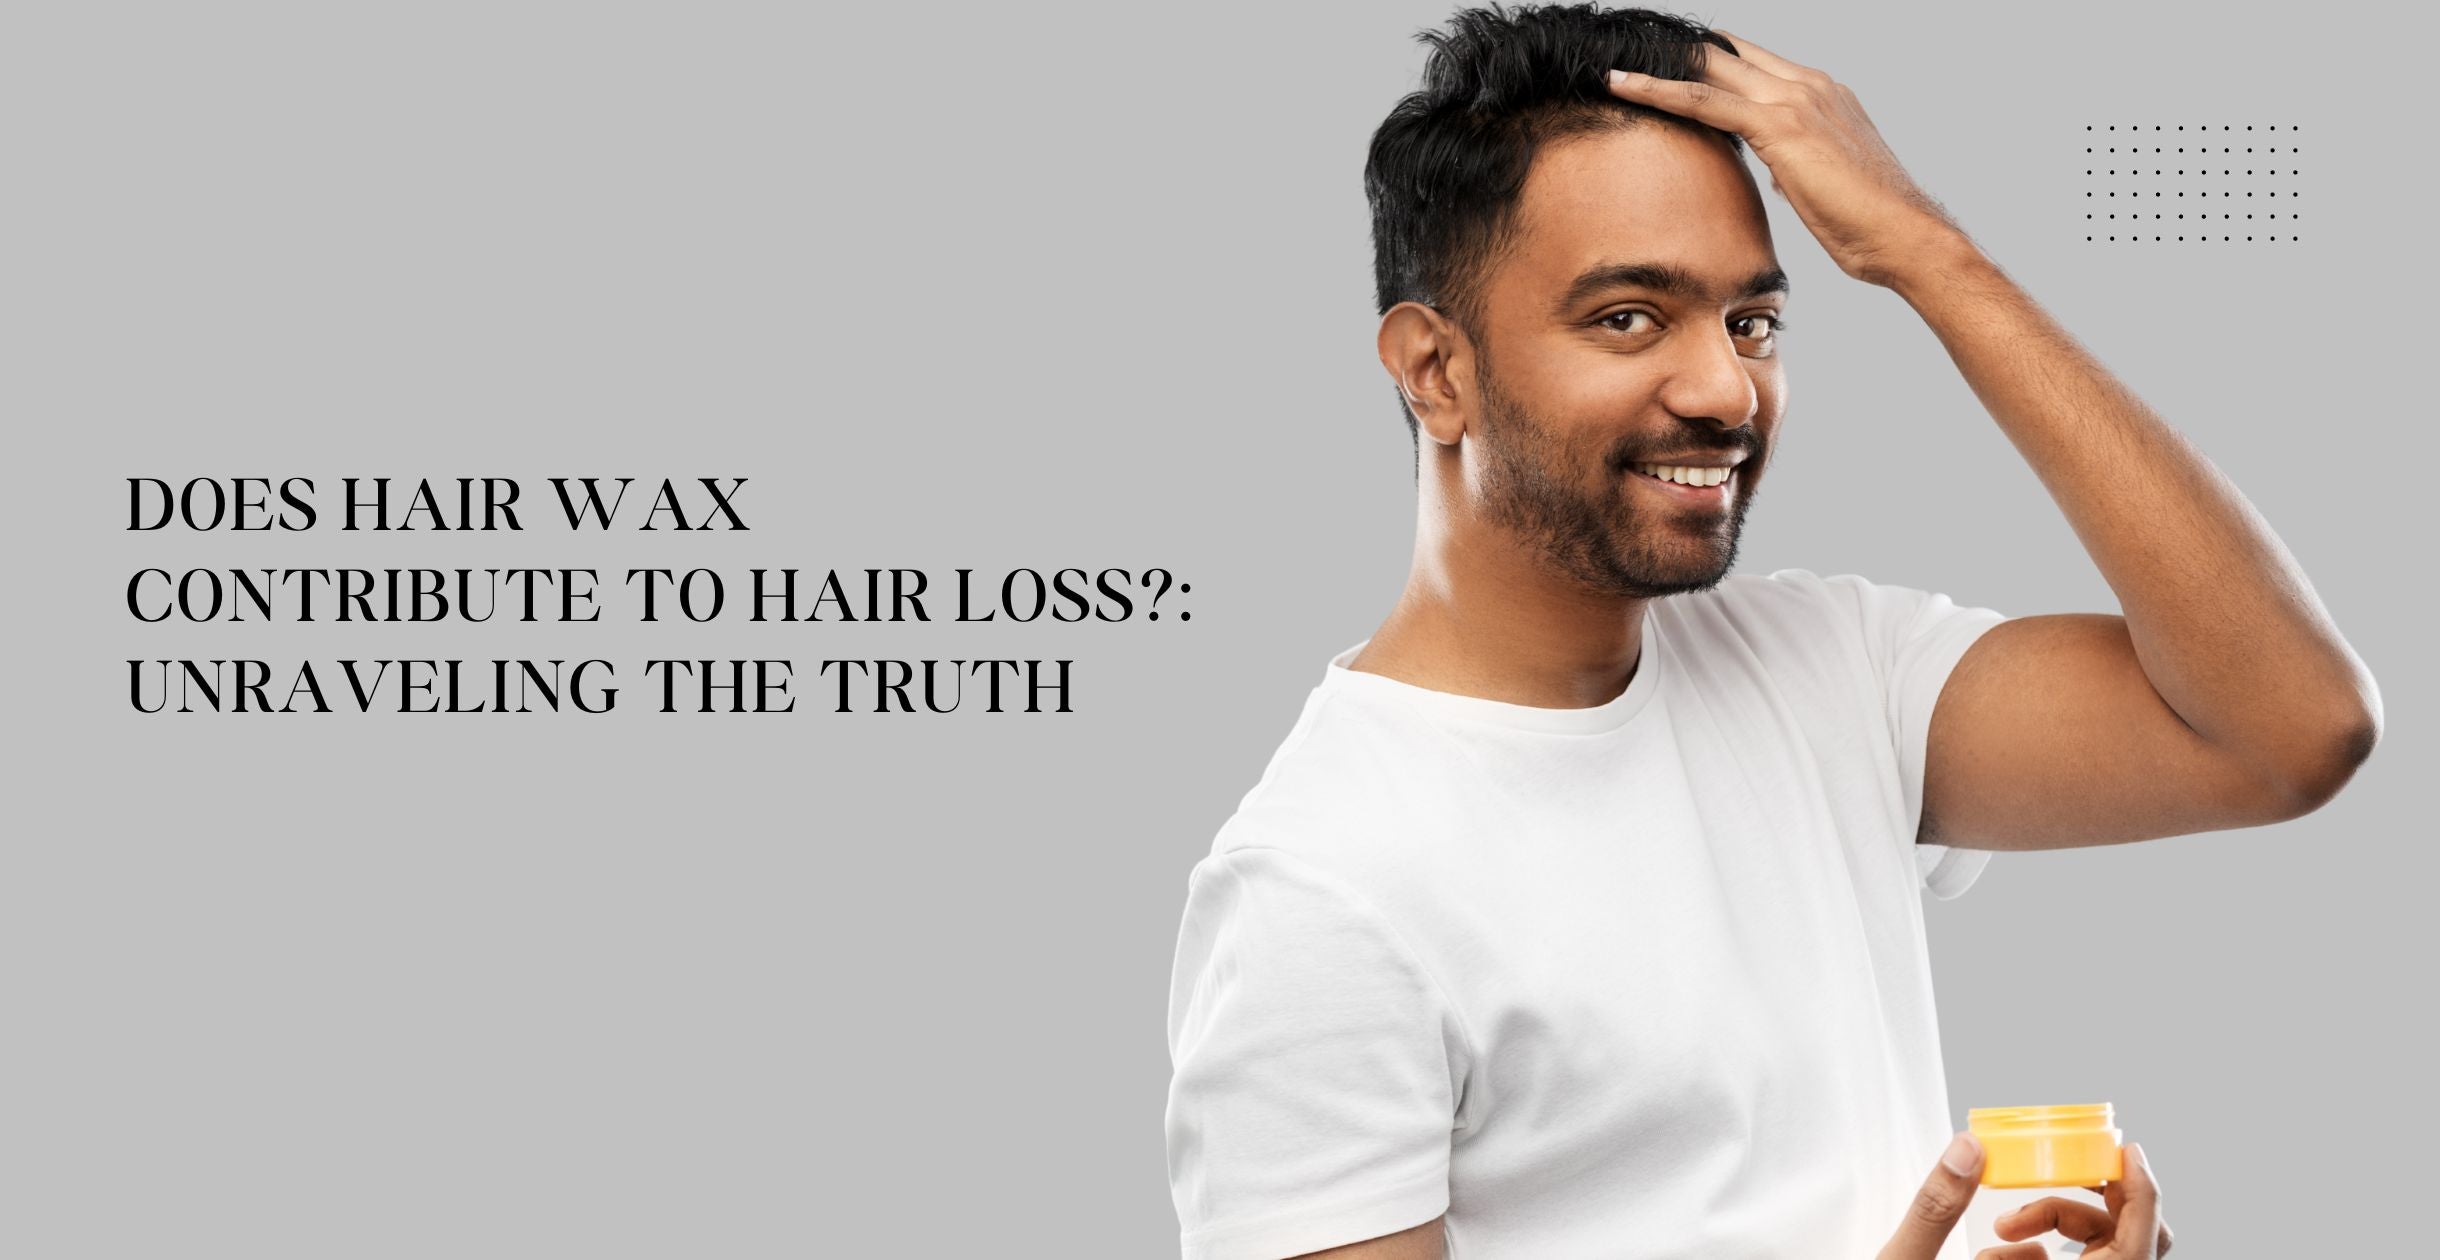 Does Hair Wax Contribute to Hair Loss?: Unraveling the Truth